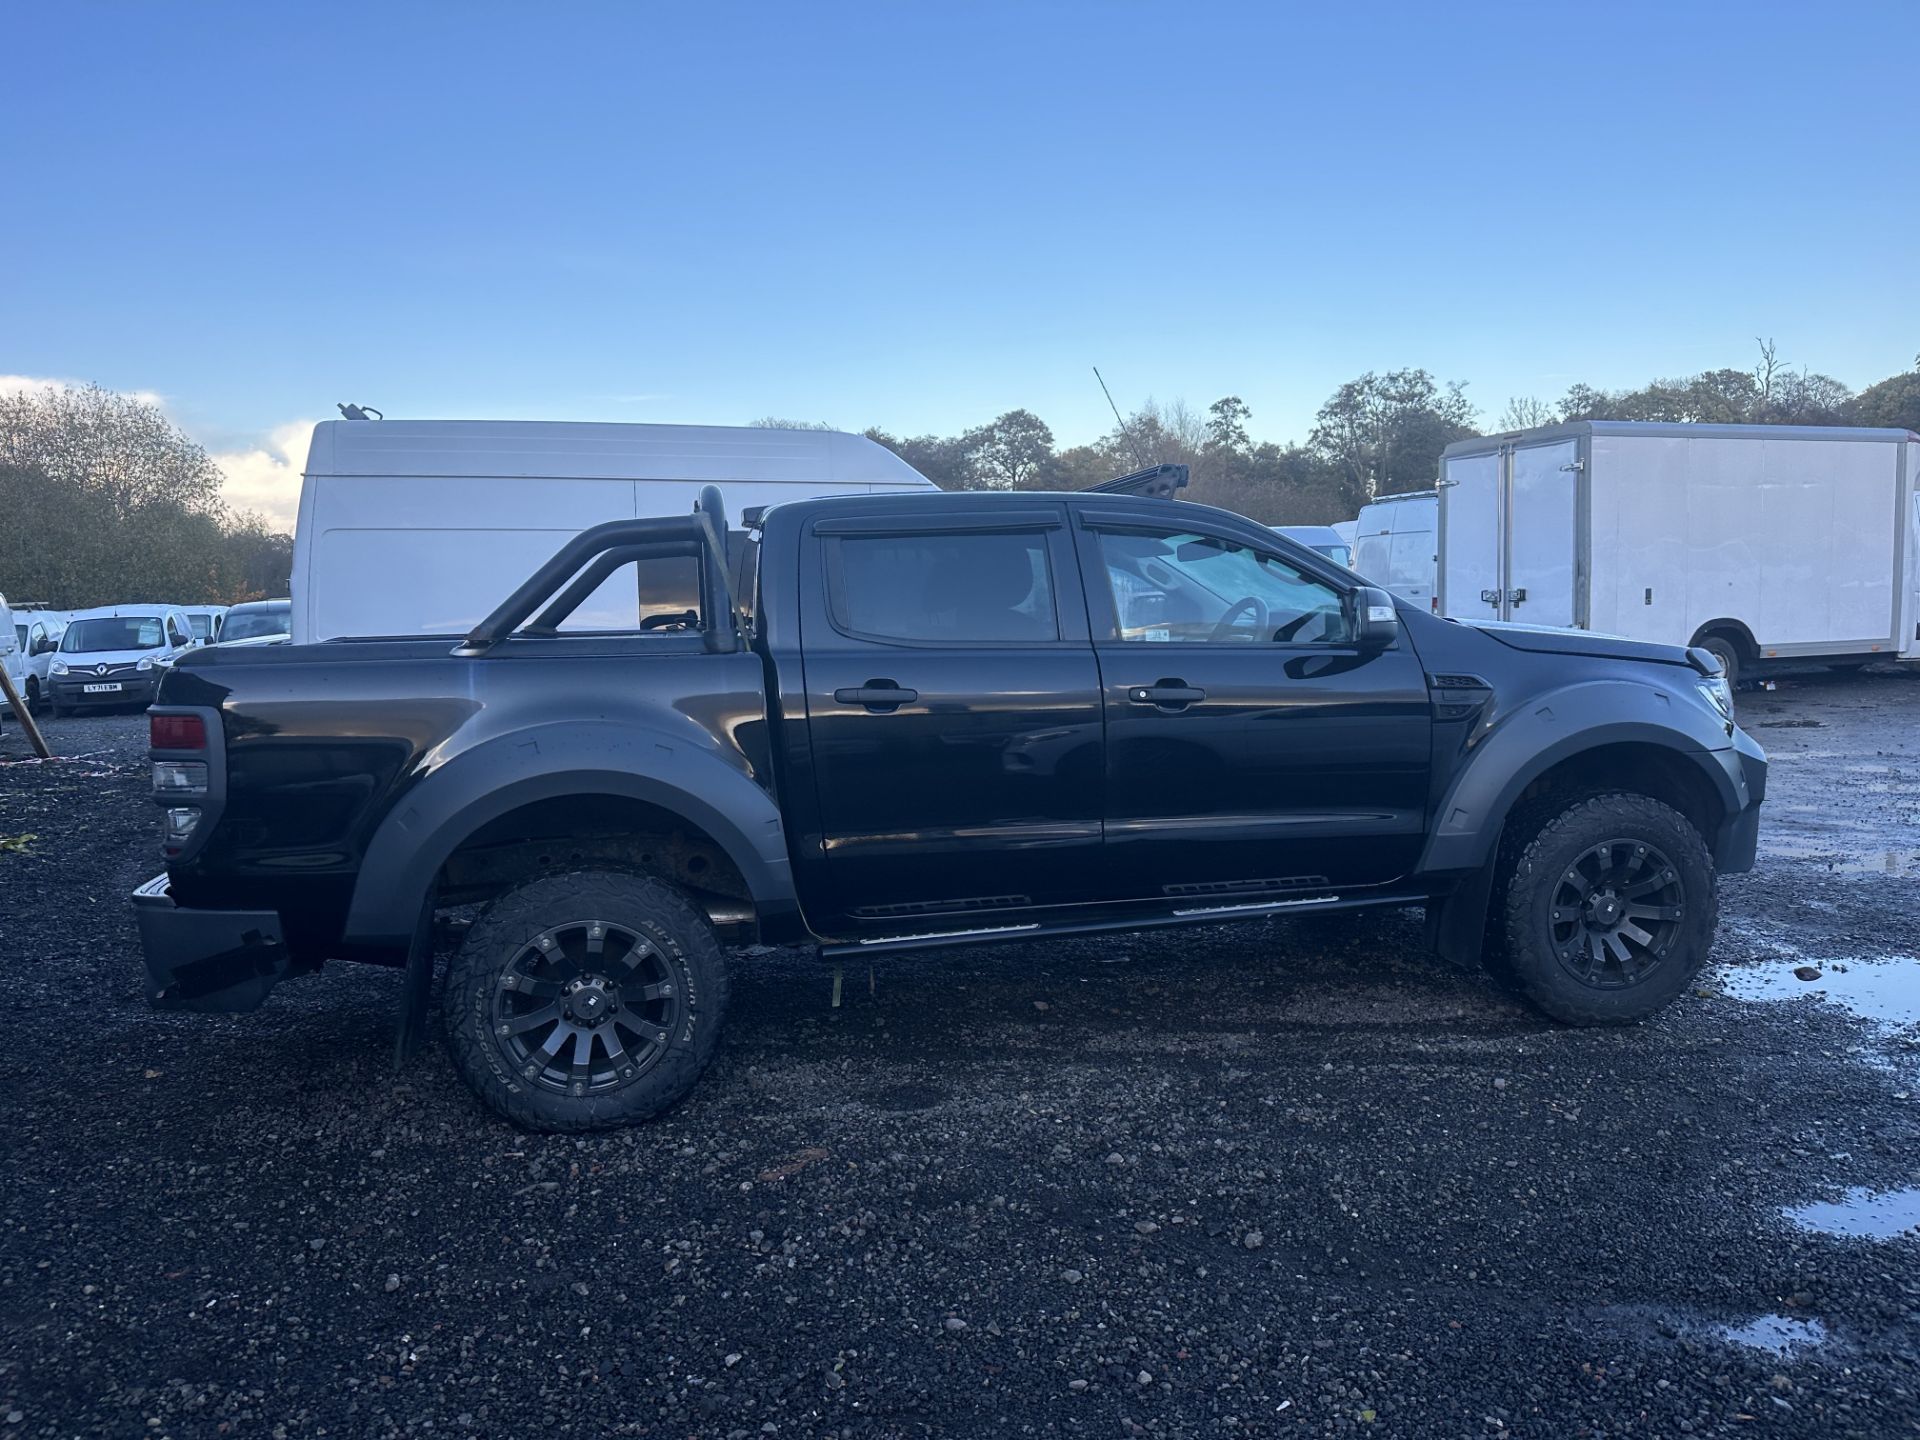 OV66RMO Model: 66 PLATE FORD RANGER LIMITED MSRT 4X4 3.2 TDCI AUTOMATIC - Image 21 of 23